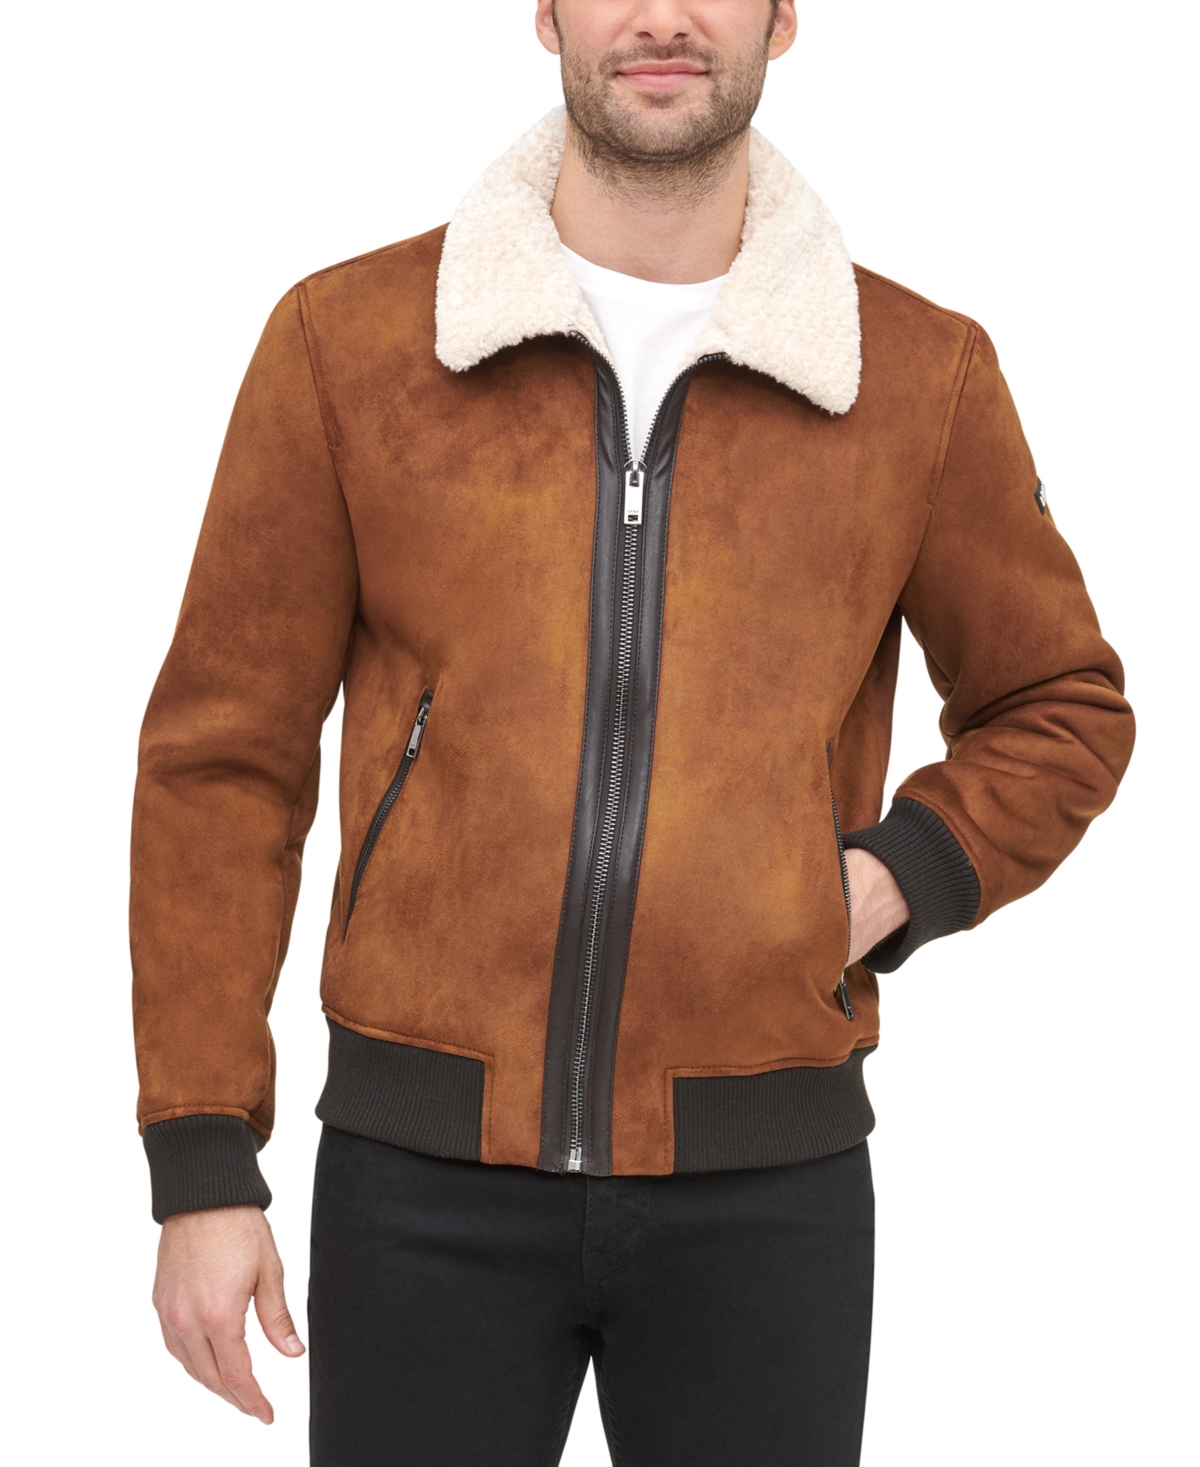 Men's Faux Shearling Bomber Jacket with Faux Fur Collar, Created for Macy's - Black